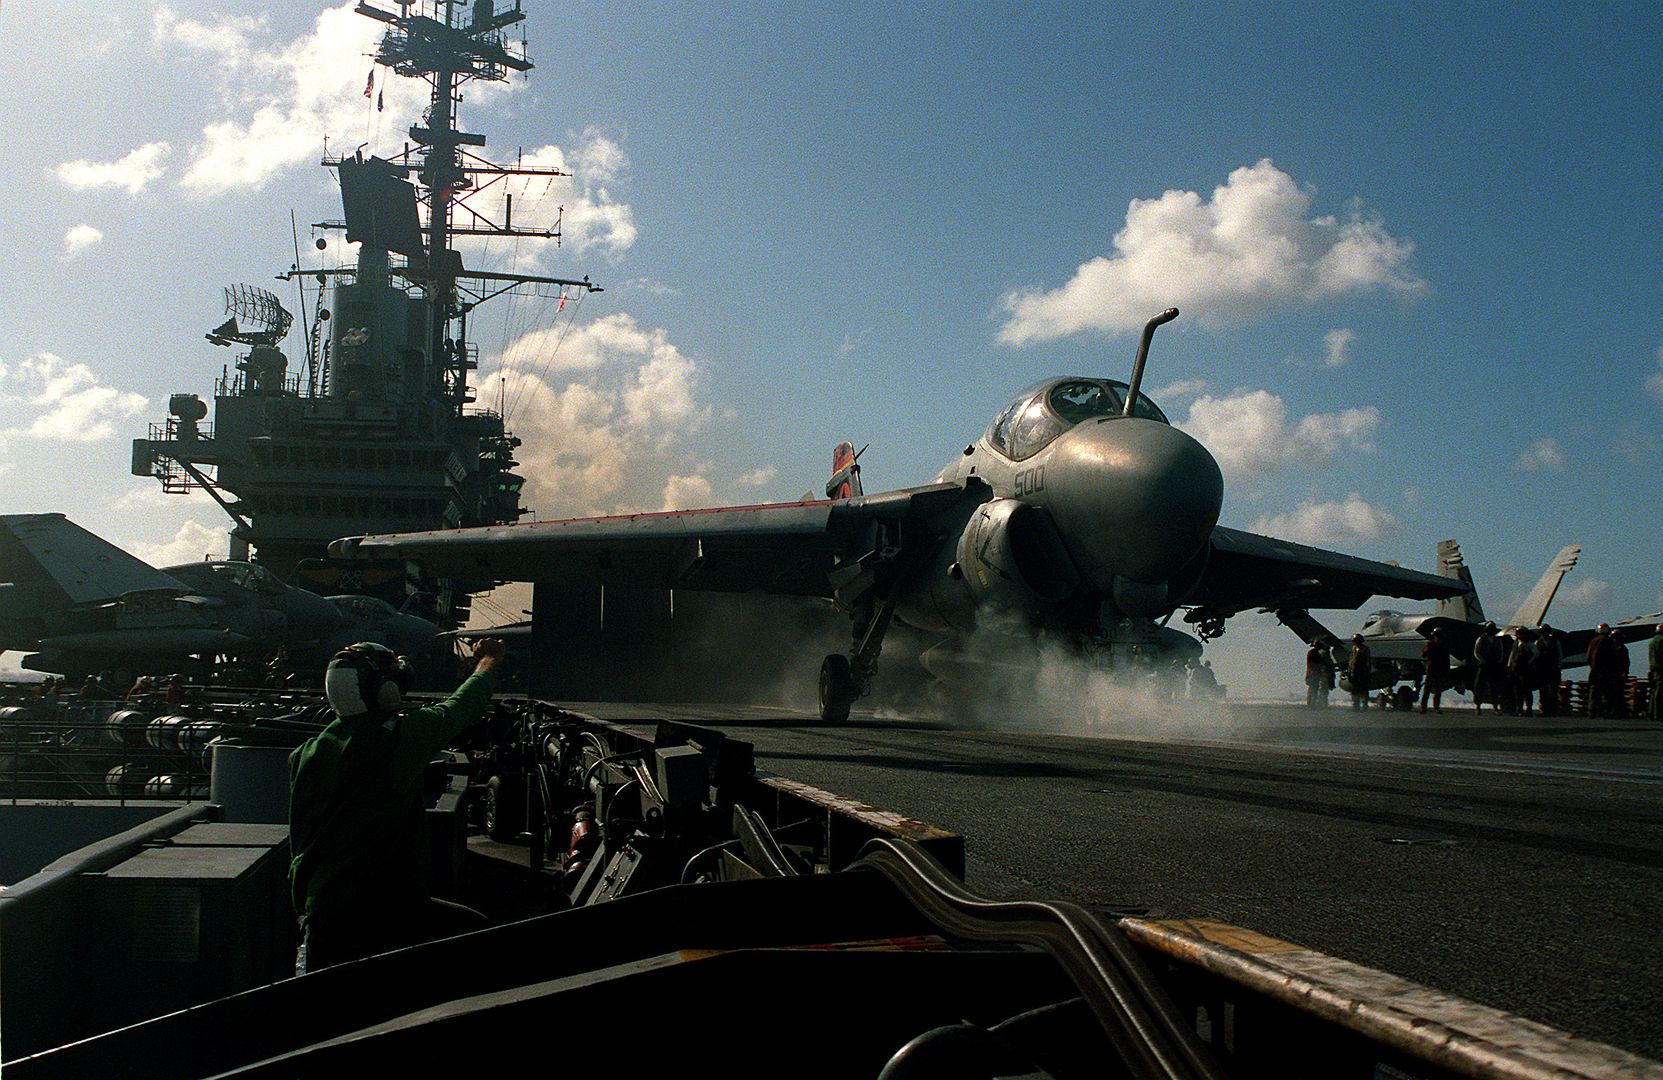 An A 6E Intruder Aircraft Is Launched From The Flight Deck Of The Aircraft Carrier USS INDEPENDENCE